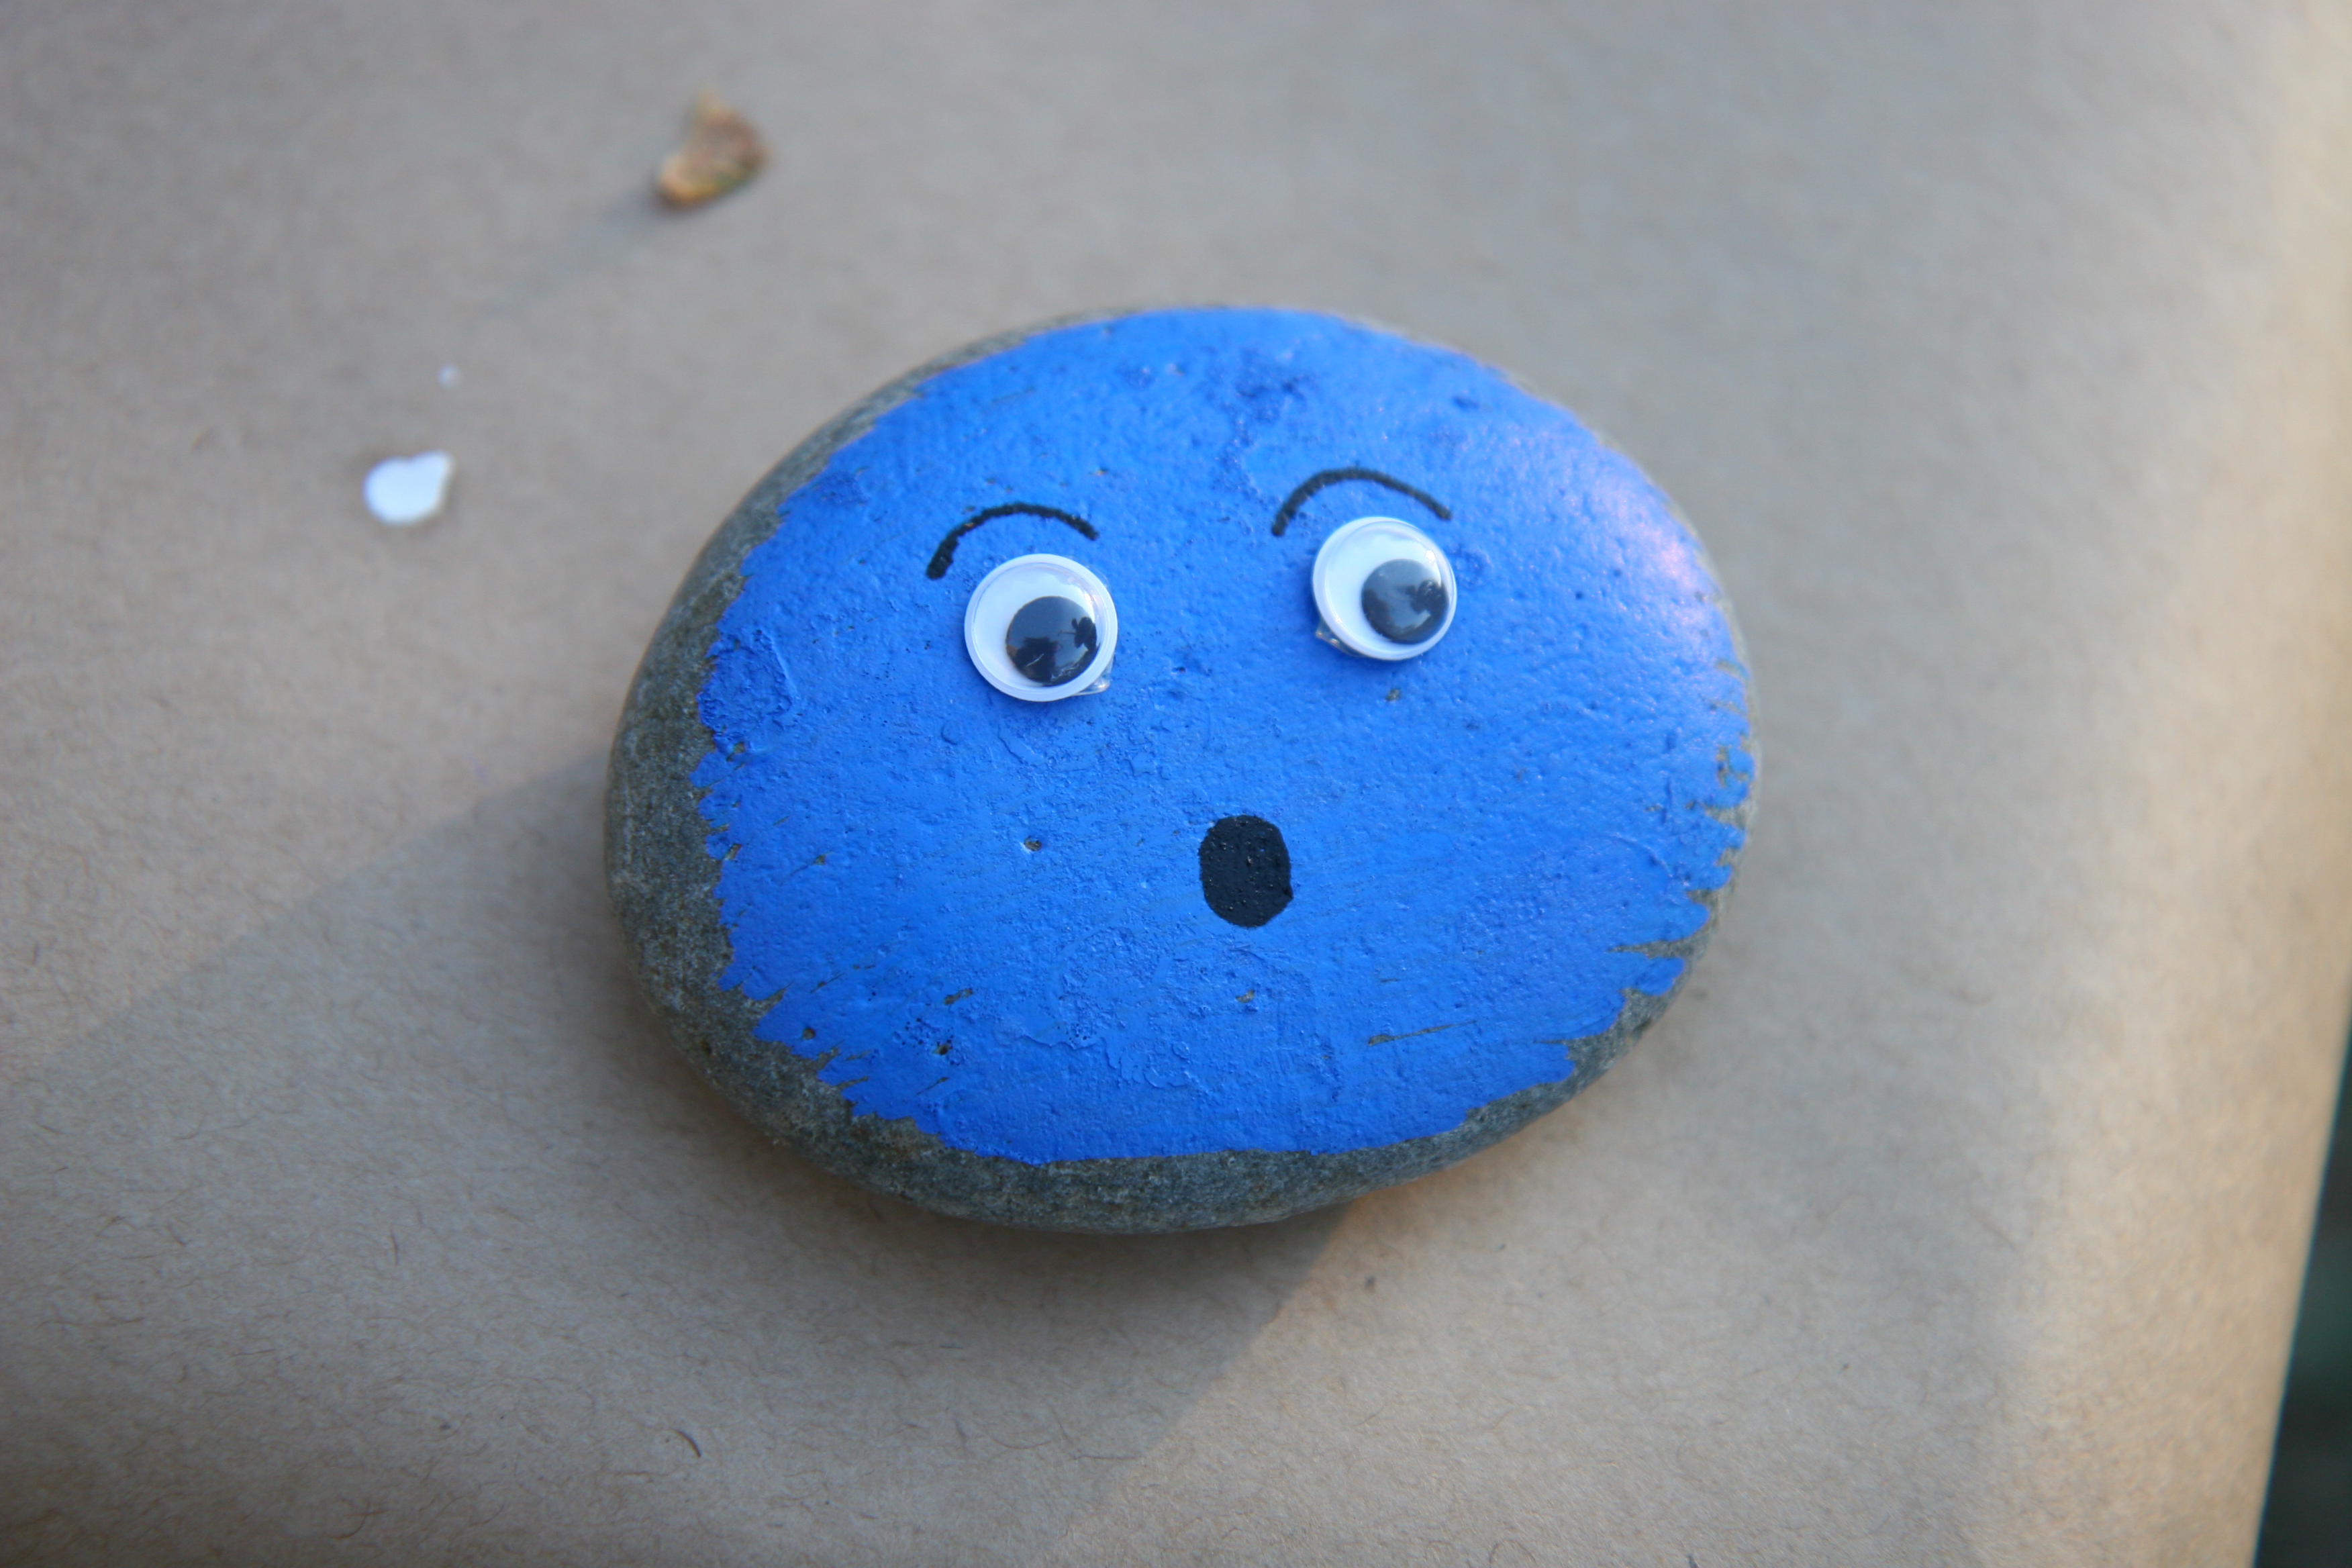 rock painted blue with a surprised face